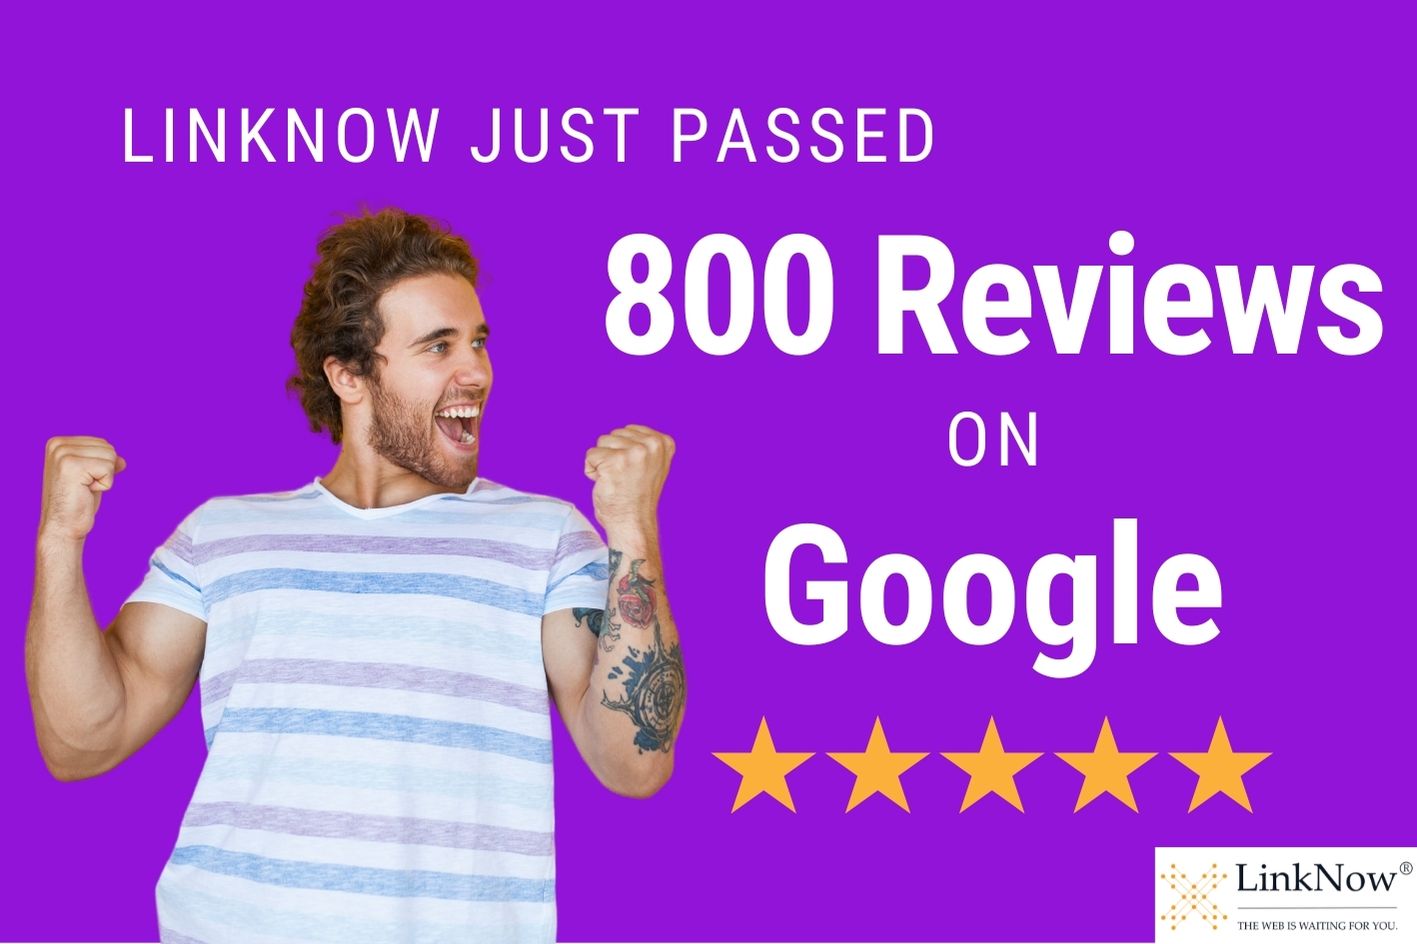 LinkNow just passed 800 reviews on Google.